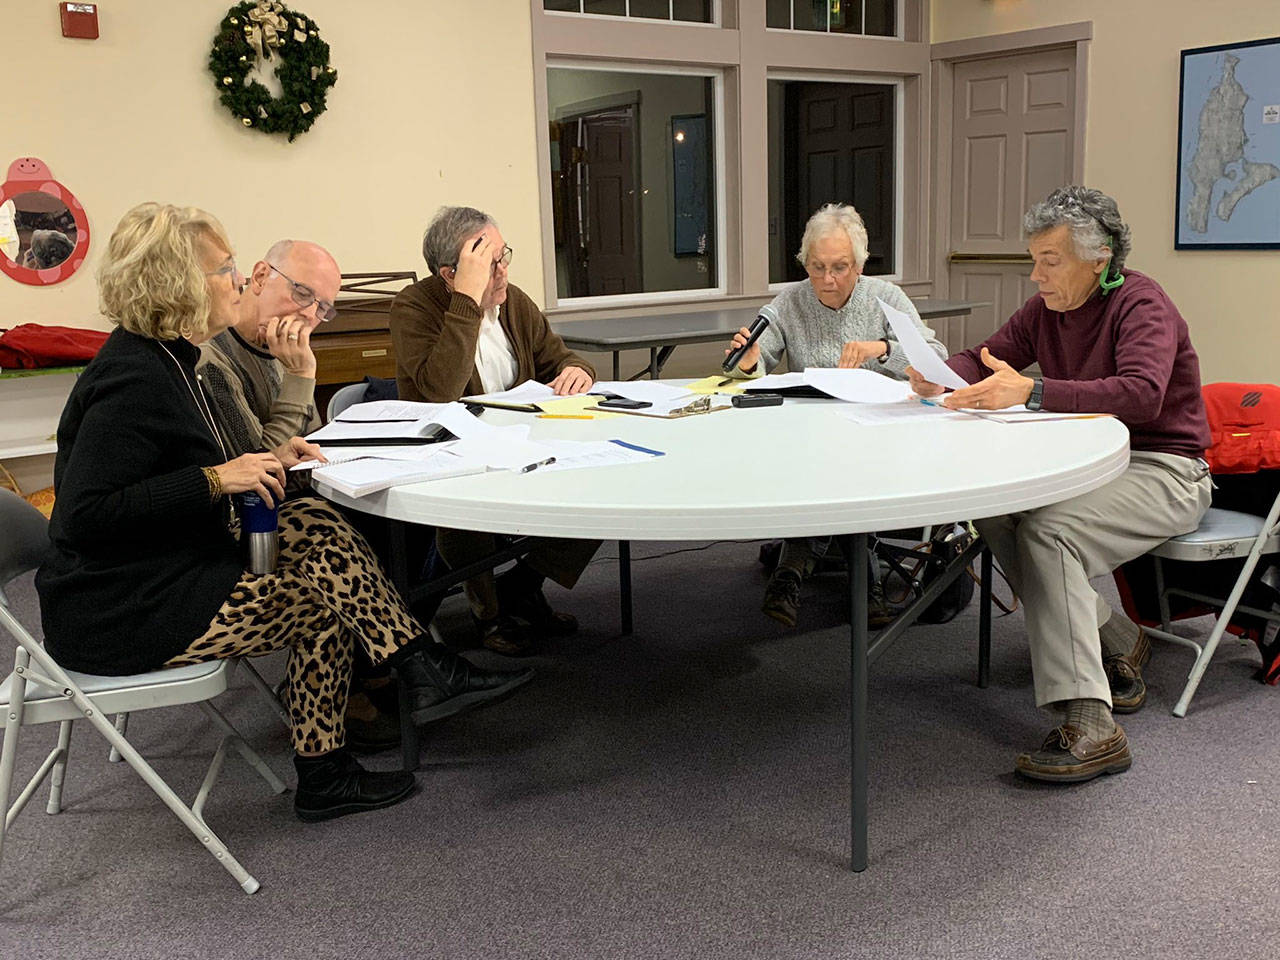 Left to right: LeeAnn Brown, Eric Pryne, Tom Langland, Wendy Noble and Don Wolczko held a Vashon Health Care District Board of Commissioners meeting on Wednesday, Dec. 11 at the Vashon Presbyterian Church (Kevin Opsahl/Staff Photo).